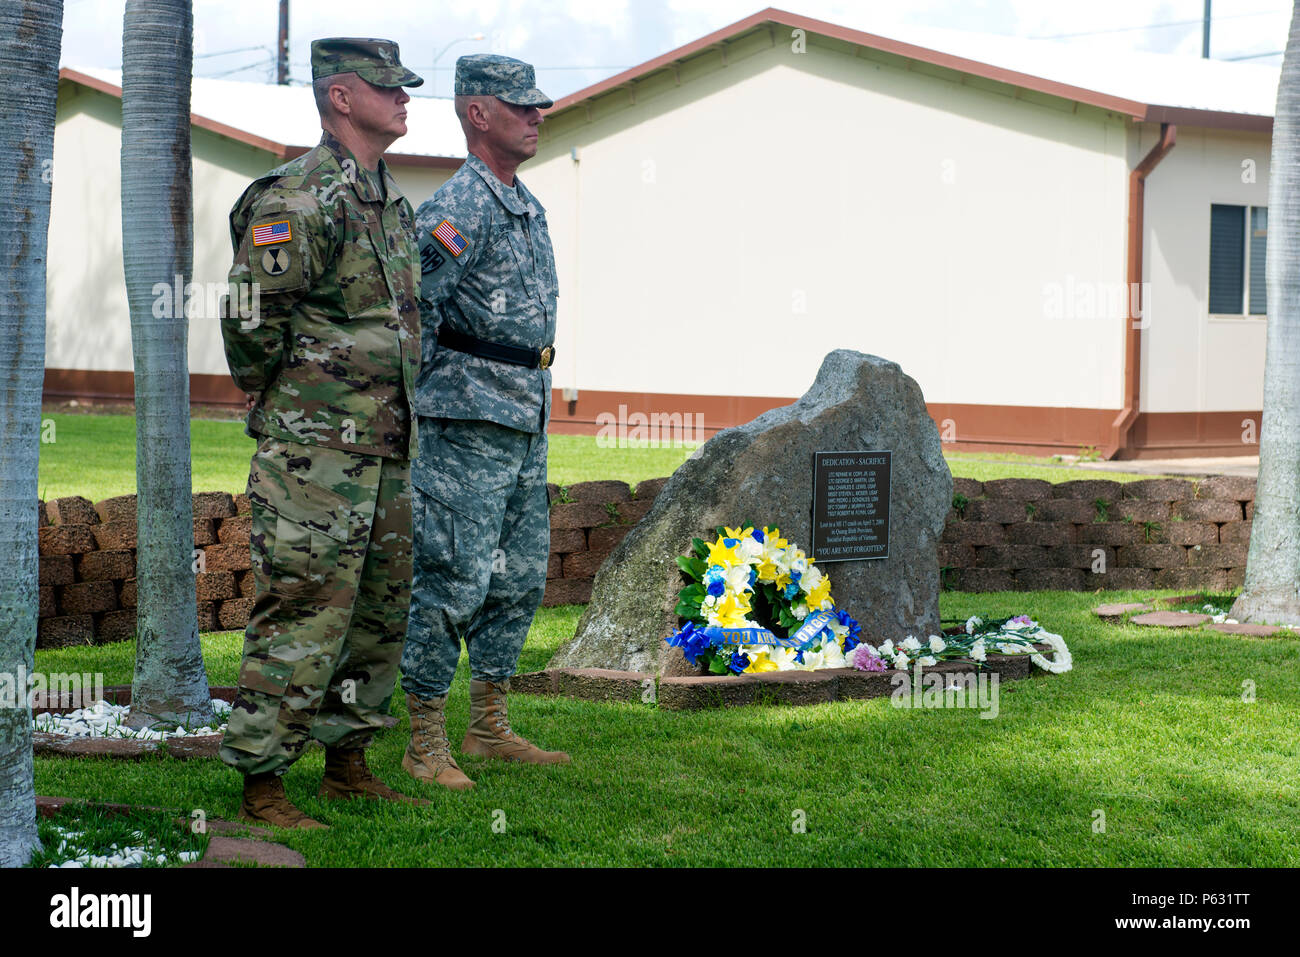 The Defense POW/MIA Accounting Agency (DPAA) Senior Enlisted Leader Sgt. Maj. Mike Swam and Deputy Director Brig. Gen. Mark Spindler stand at attention next to the memorial monument during a memorial service for seven service members that lost their lives in a helicopter crash on Apr. 7, 2001.  The ceremony was conducted today on Joint Base Pearl Harbor-Hickam to honor the sacrifice and memory of the service members. The DPAA works to provide the fullest possible accounting of missing personnel to their families and the nation.  (DoD photo by MC3 Armando Velez/Released) Stock Photo